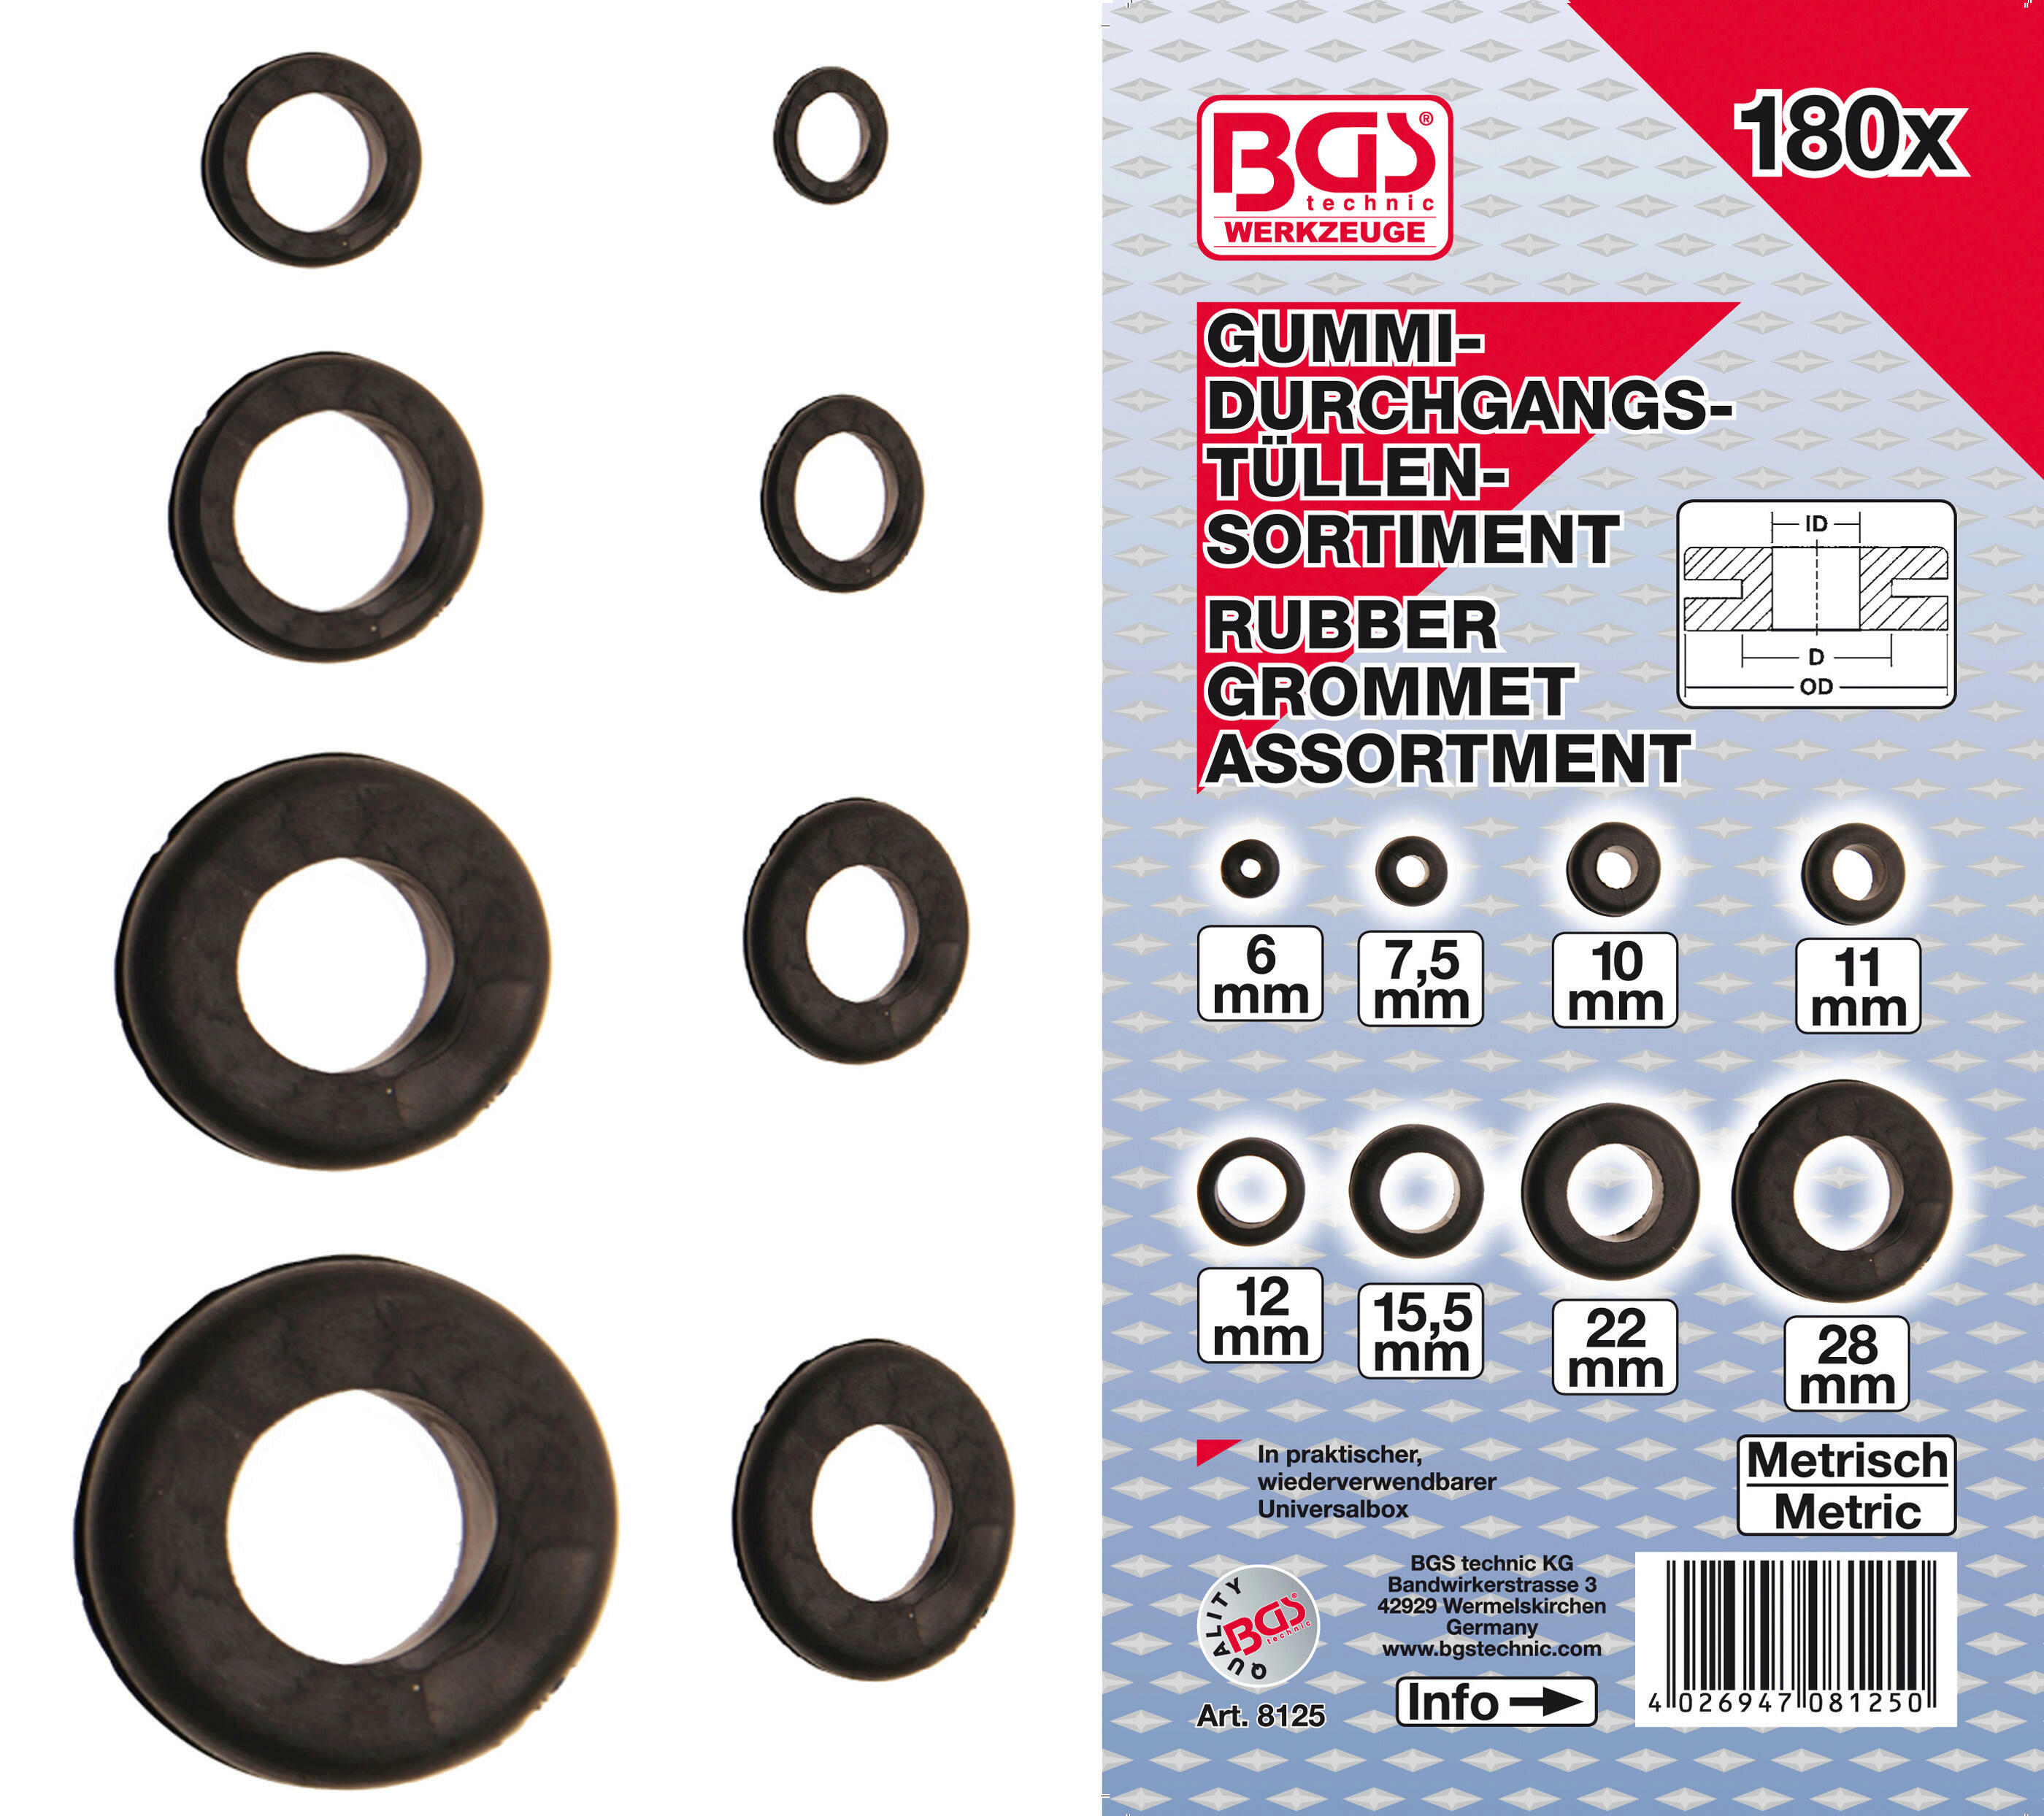 BGS Assortment, cable entry grommets